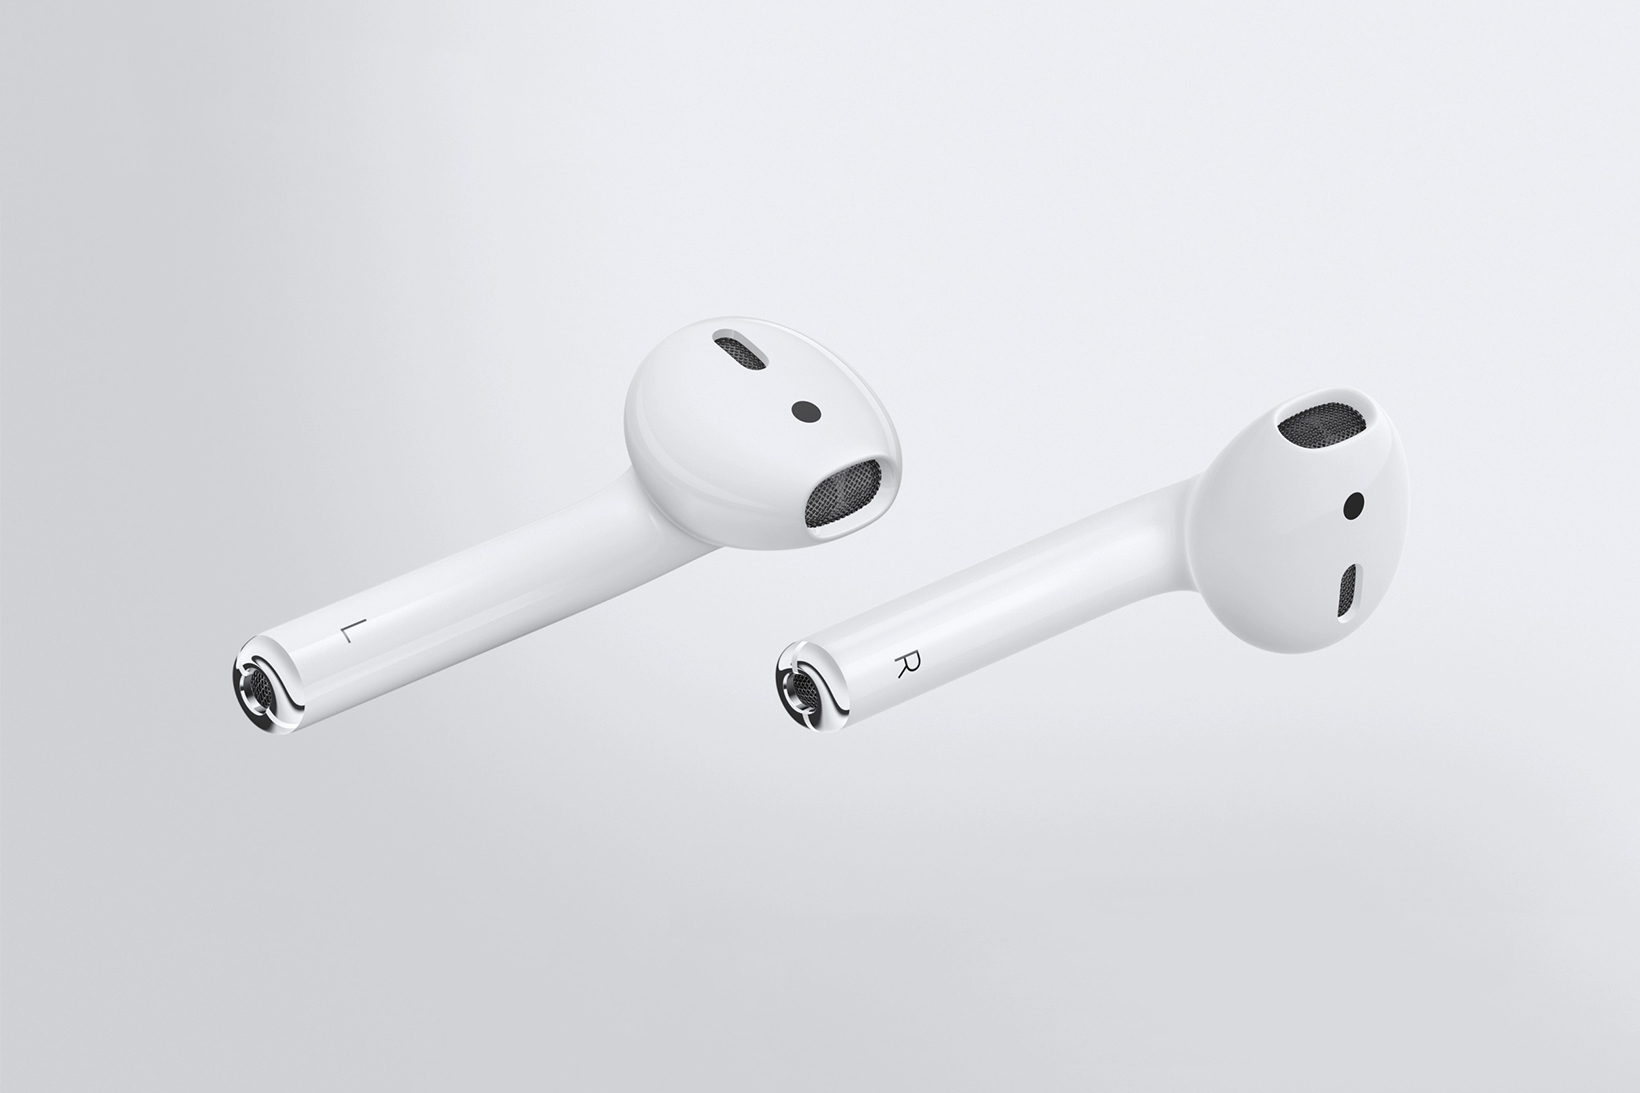 Apple’s AirPods make up over 50% of ALL wireless headphone sales